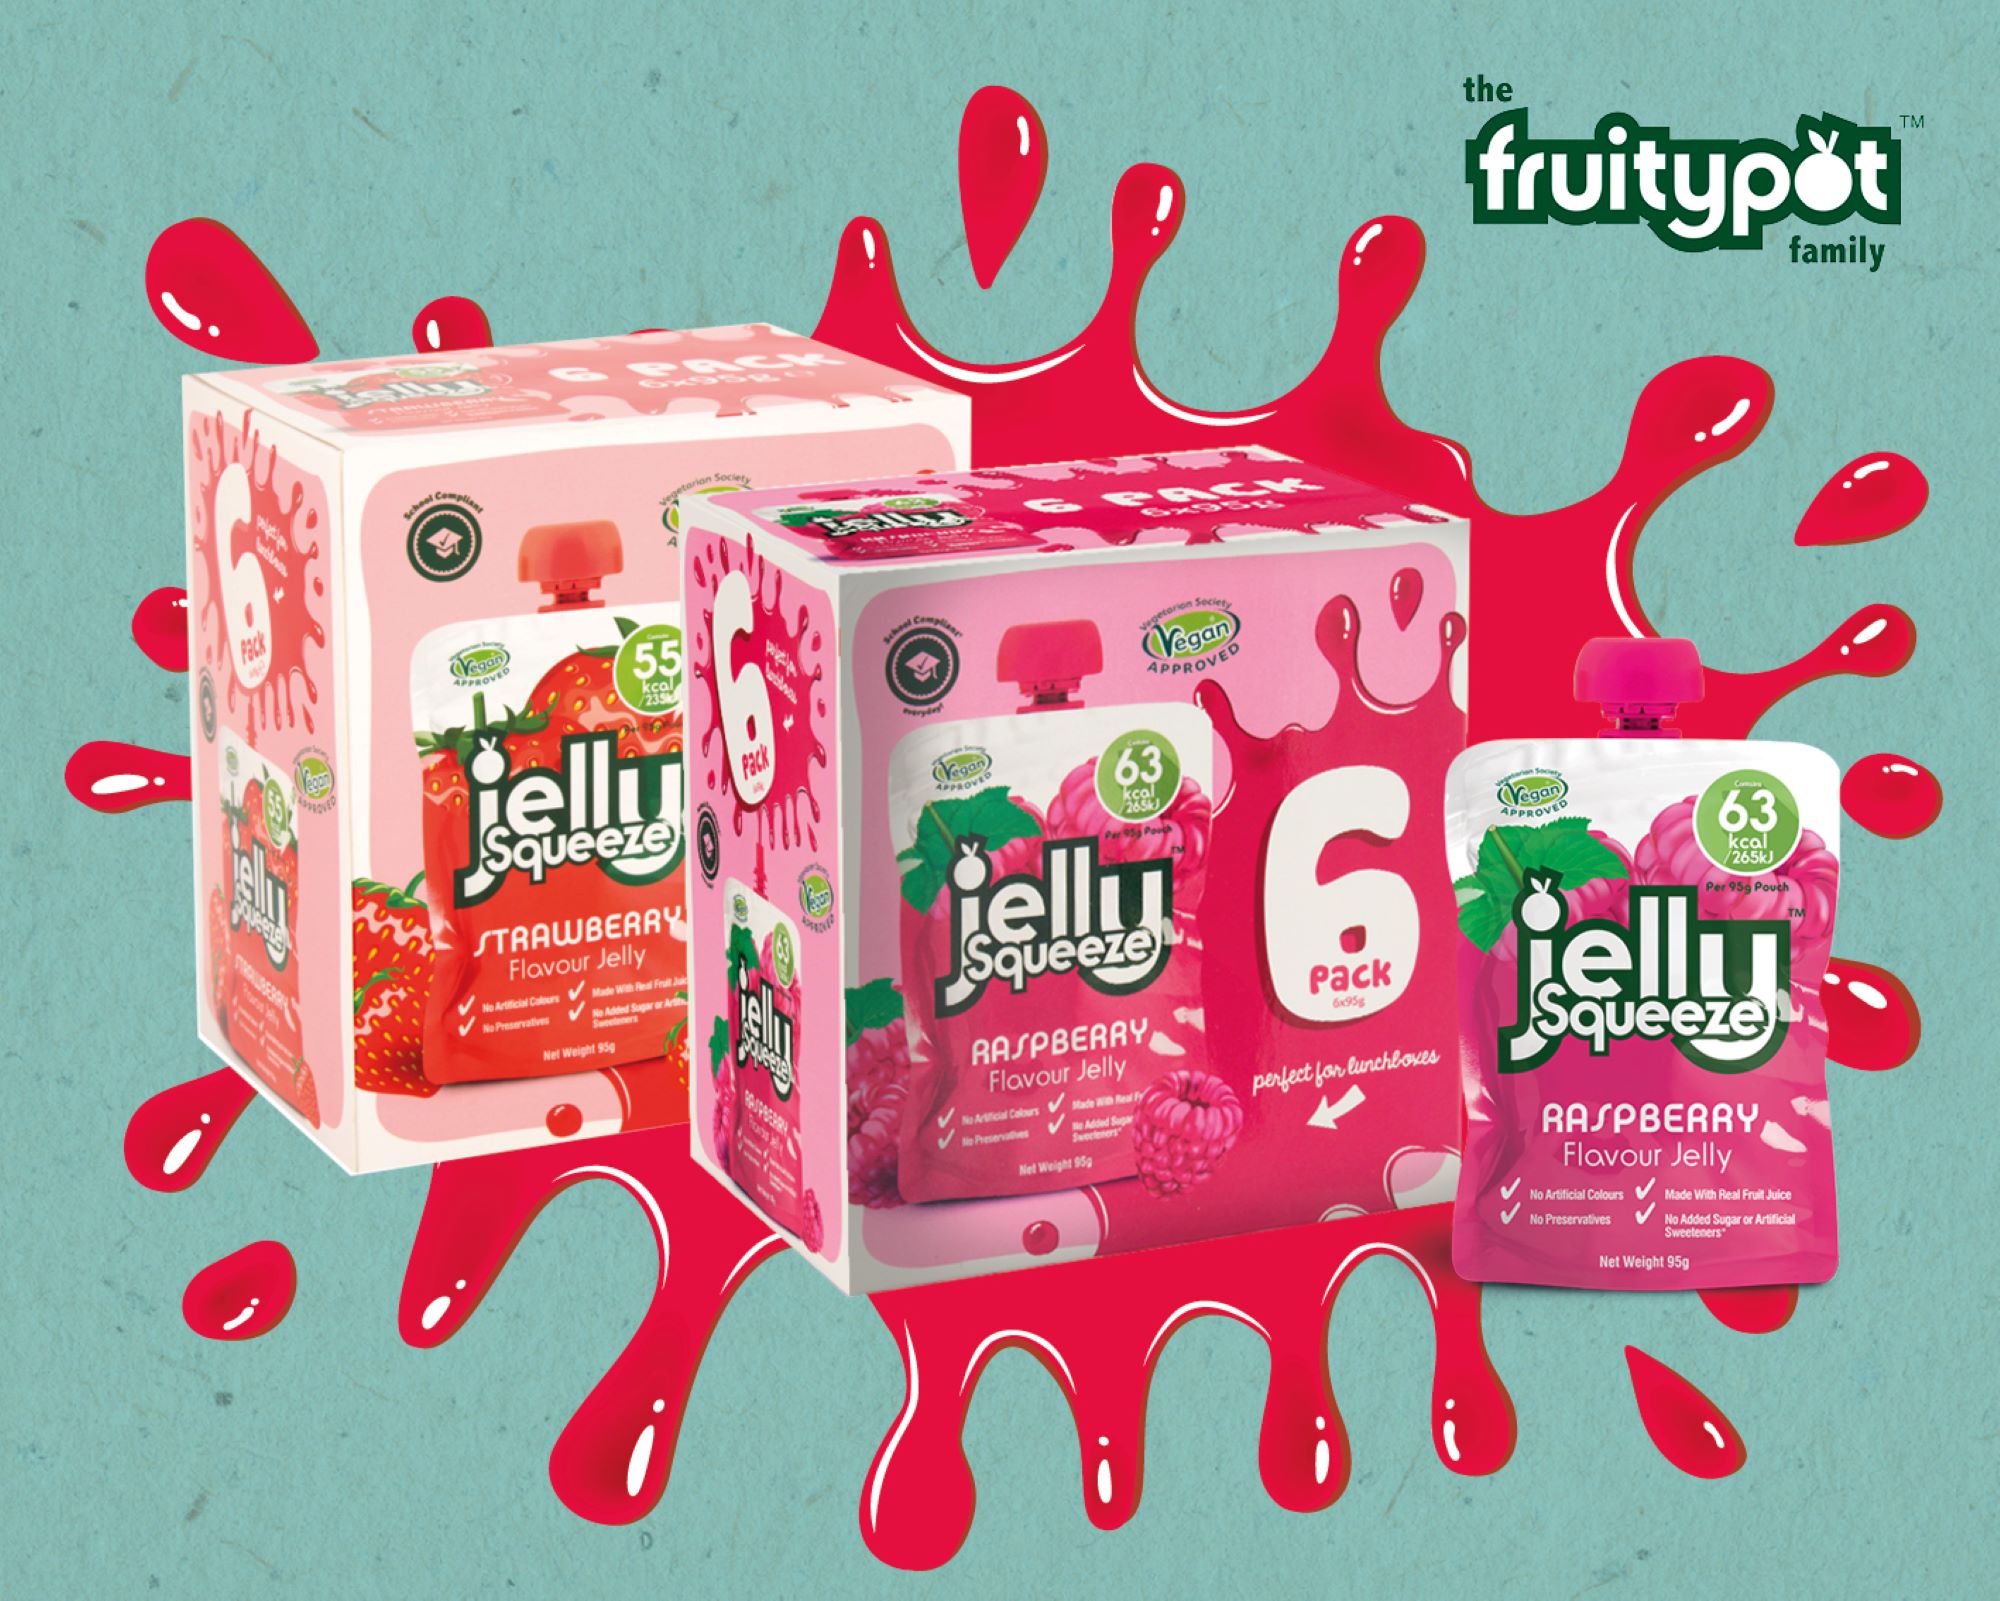 jelly squeeze products with splash